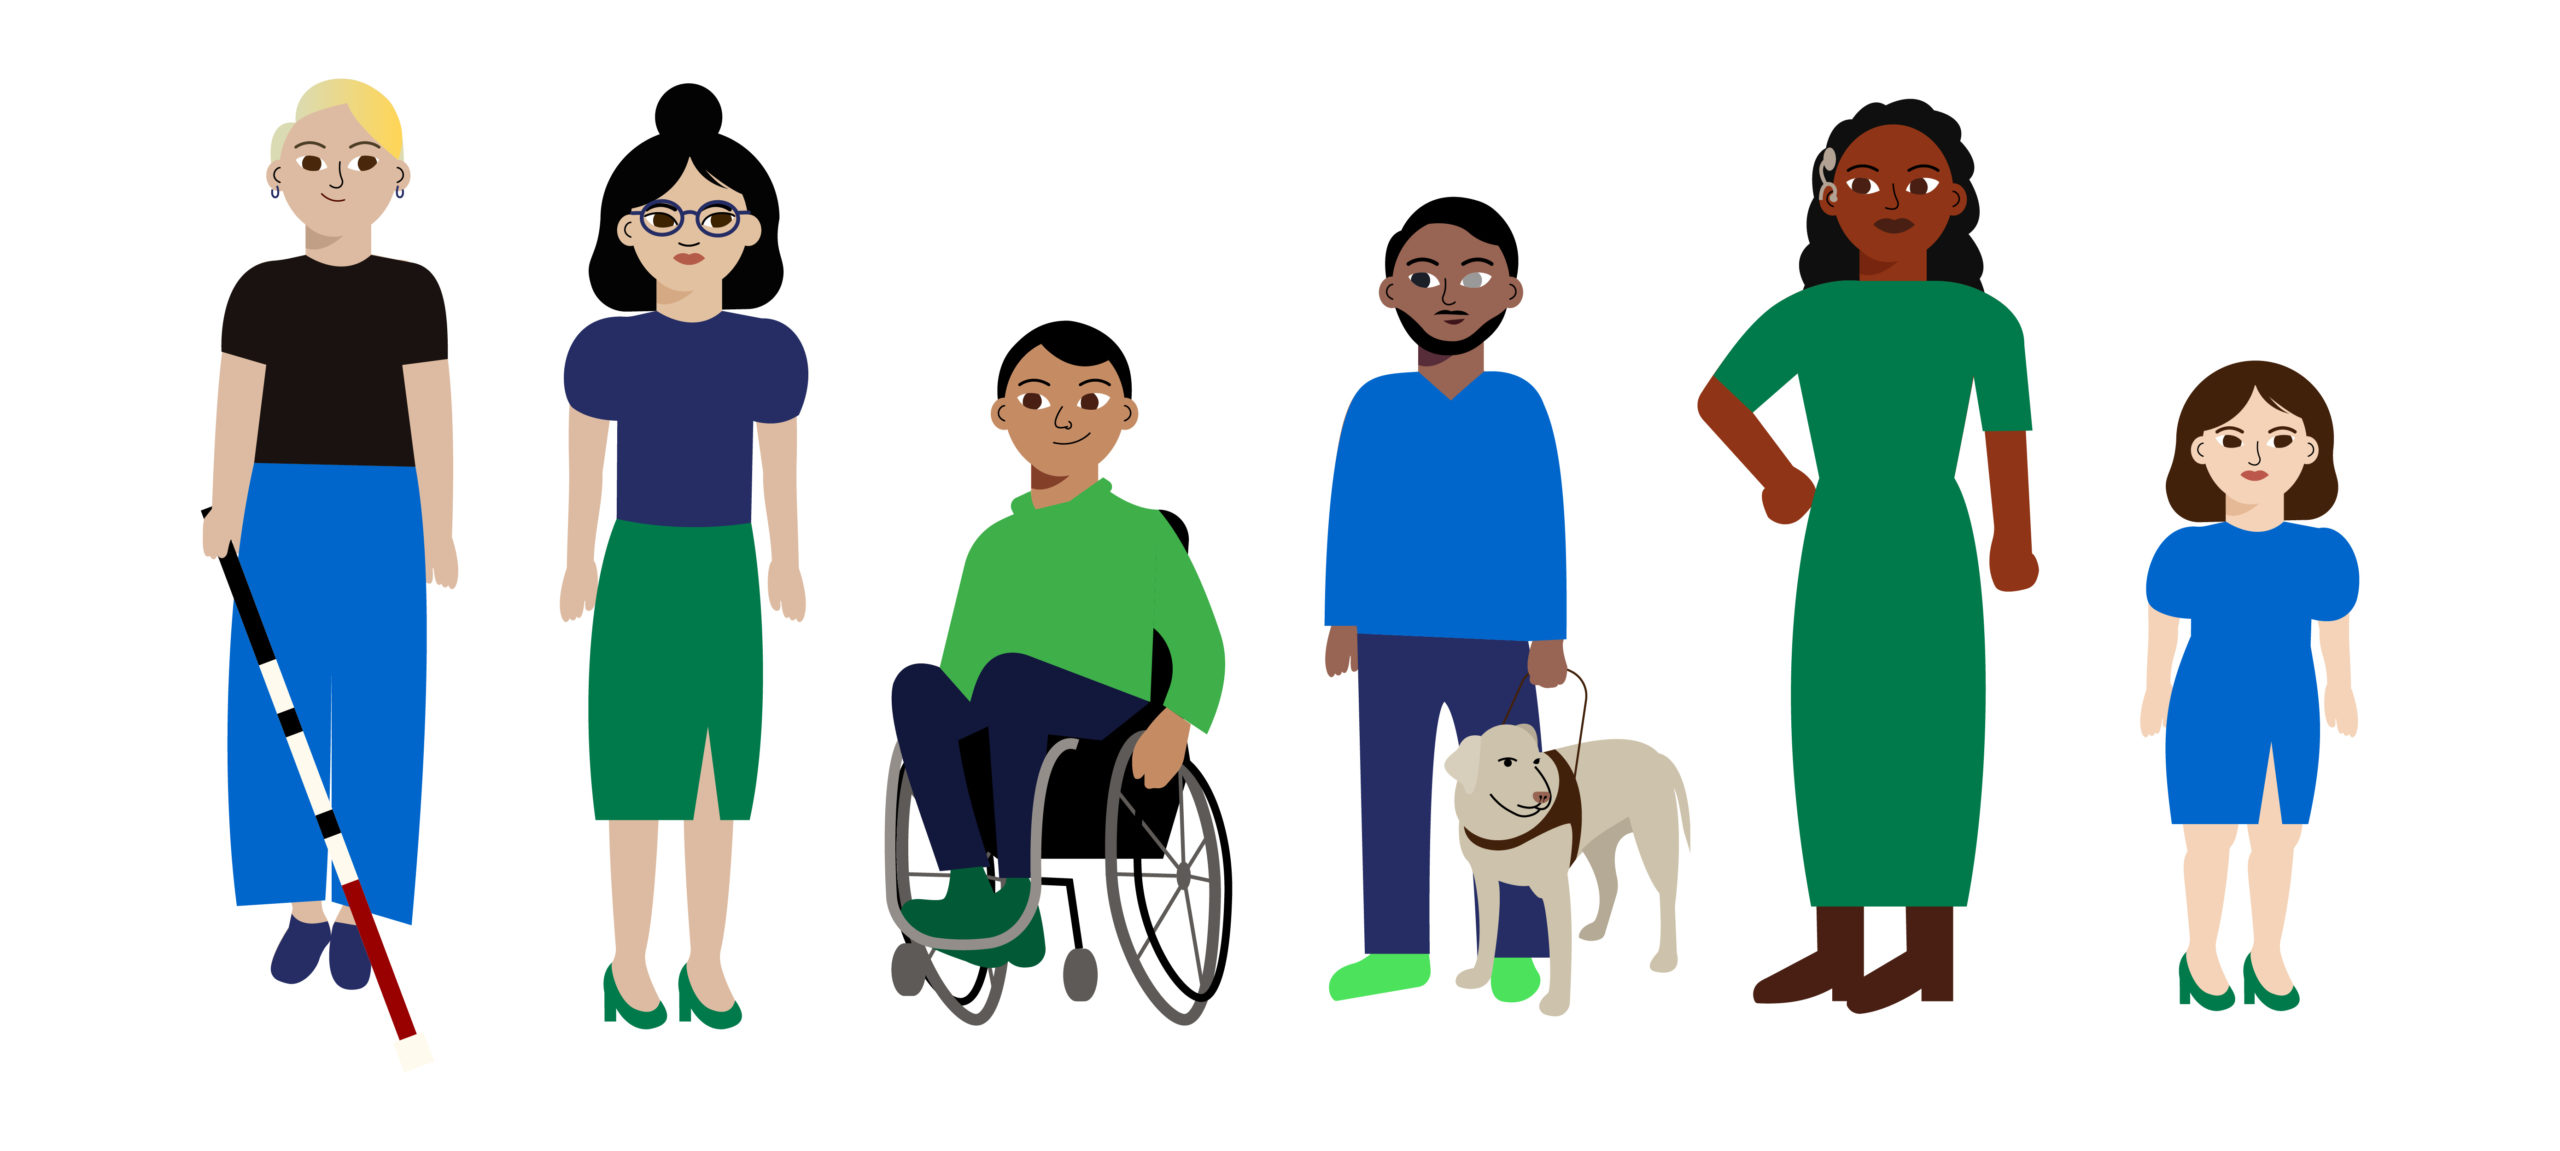 Six illustrated individuals with disabilities: White non-binary person with low vision, Asian woman with non-apparent disability, Hispanic man using a wheelchair, South Asian man with service animal, Black woman with cochlear implant, and a white woman with Dwarfism. 